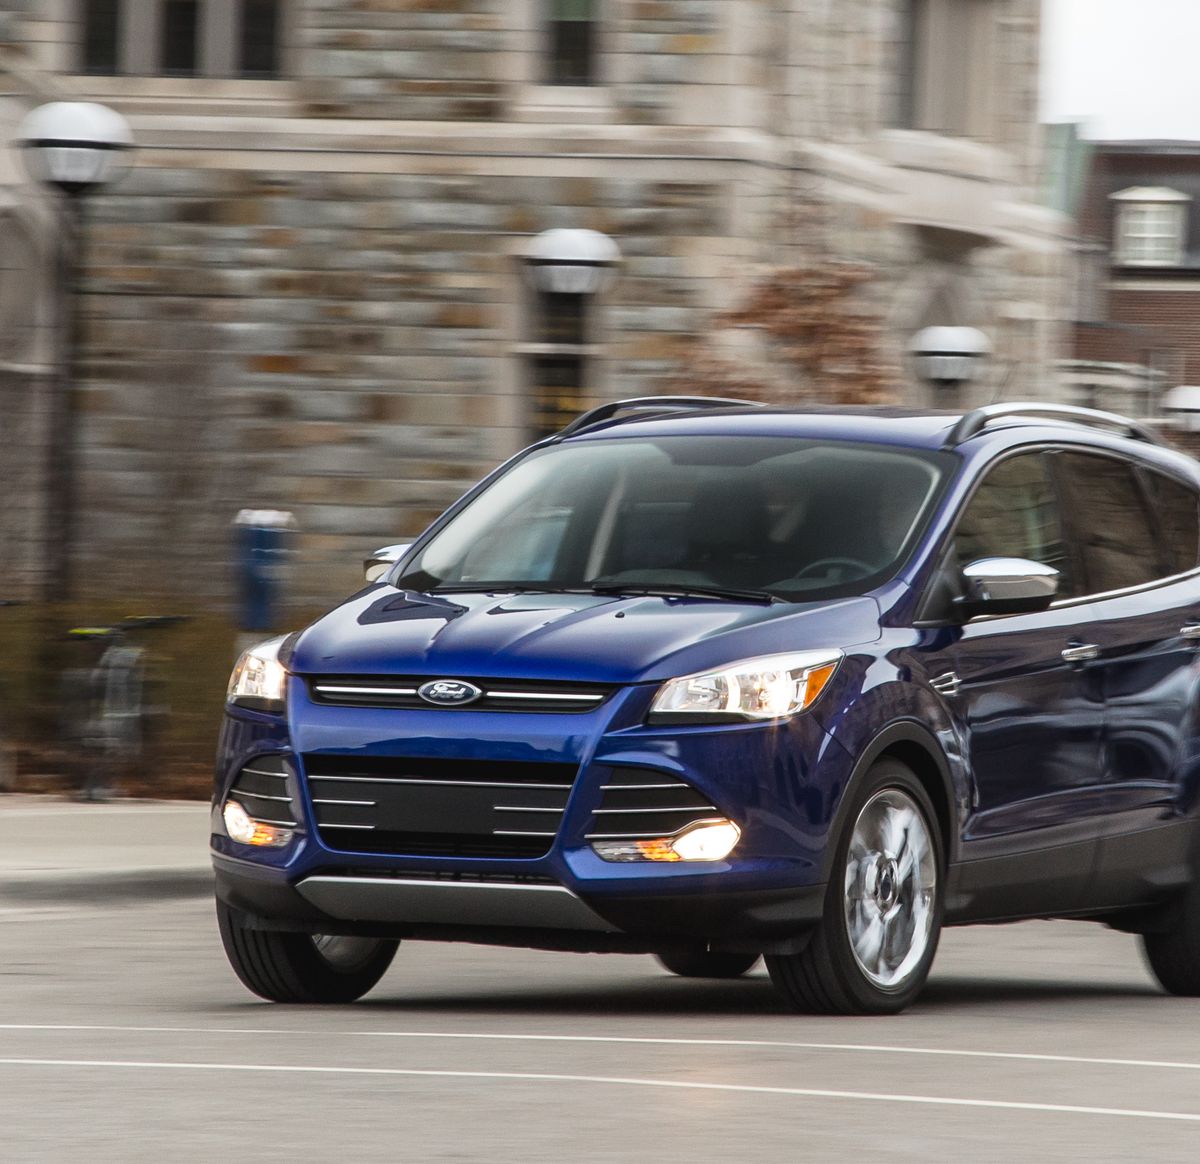 Ford Focus Fourth Generation: Most Up-to-Date Encyclopedia, News & Reviews